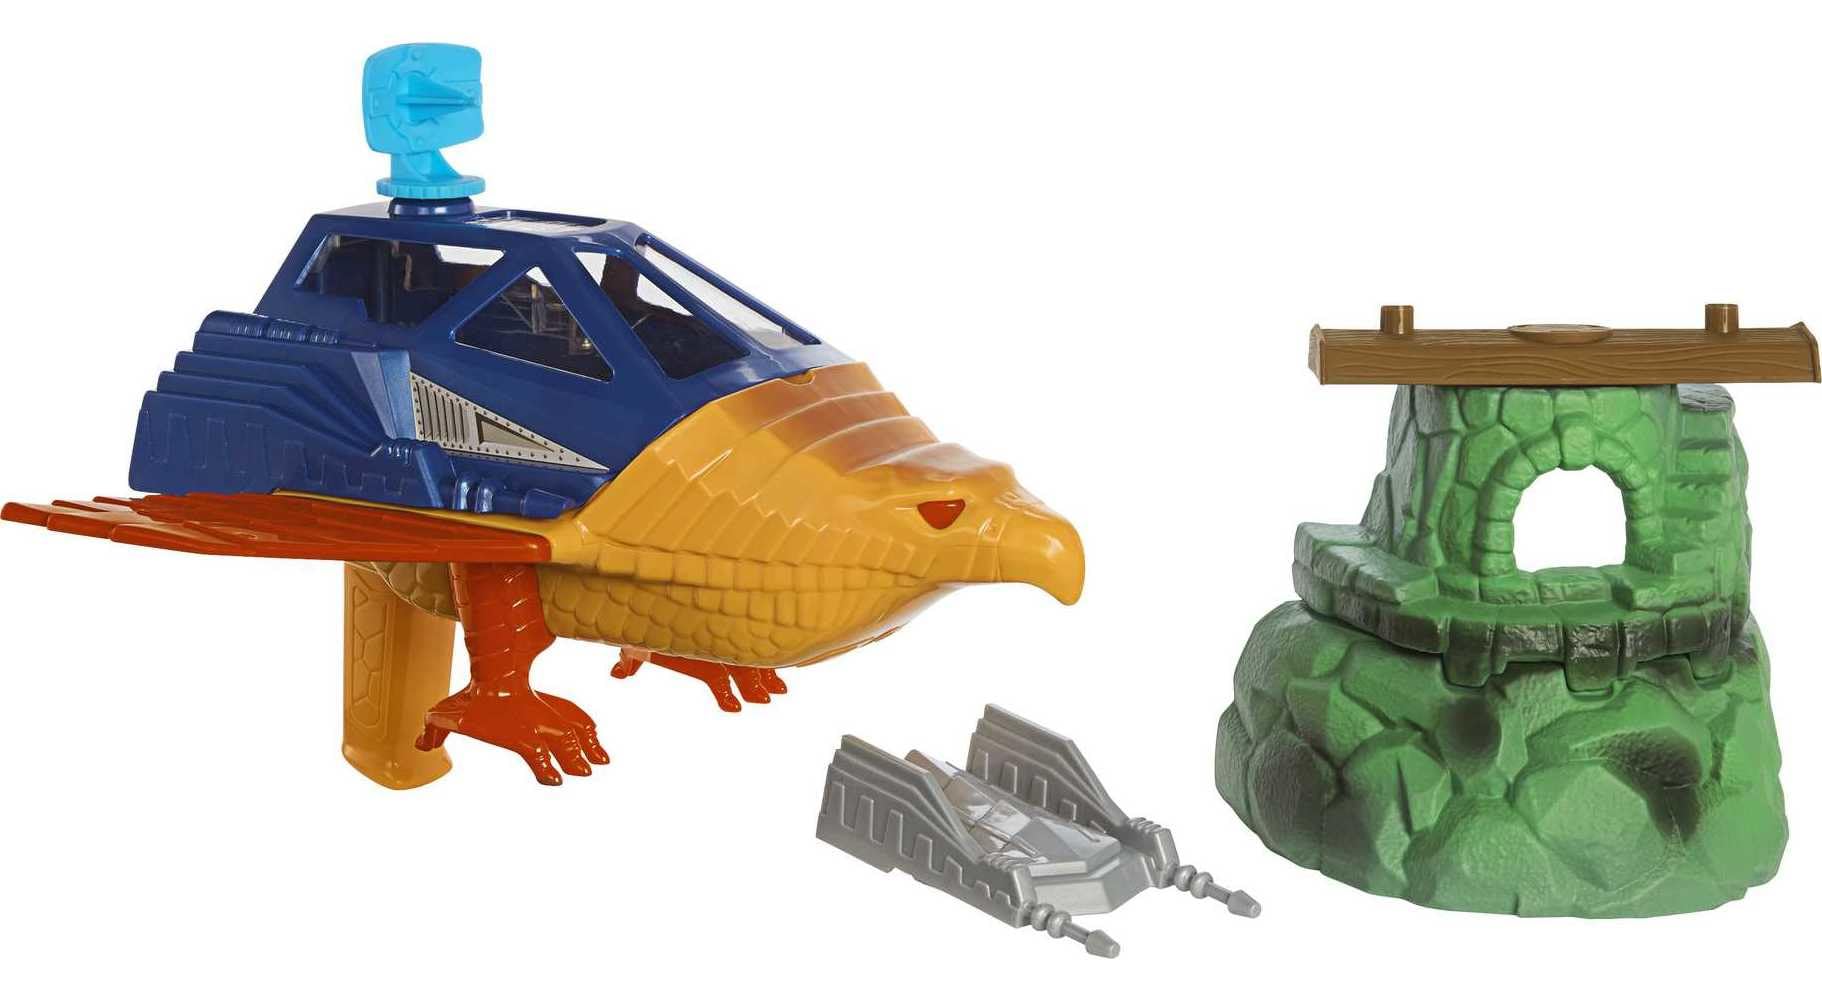 Masters of the Universe Origins Playset with Toy Plane & Accessories, Talon Fighter & Point Dread Outpost, 5.5-in Scale